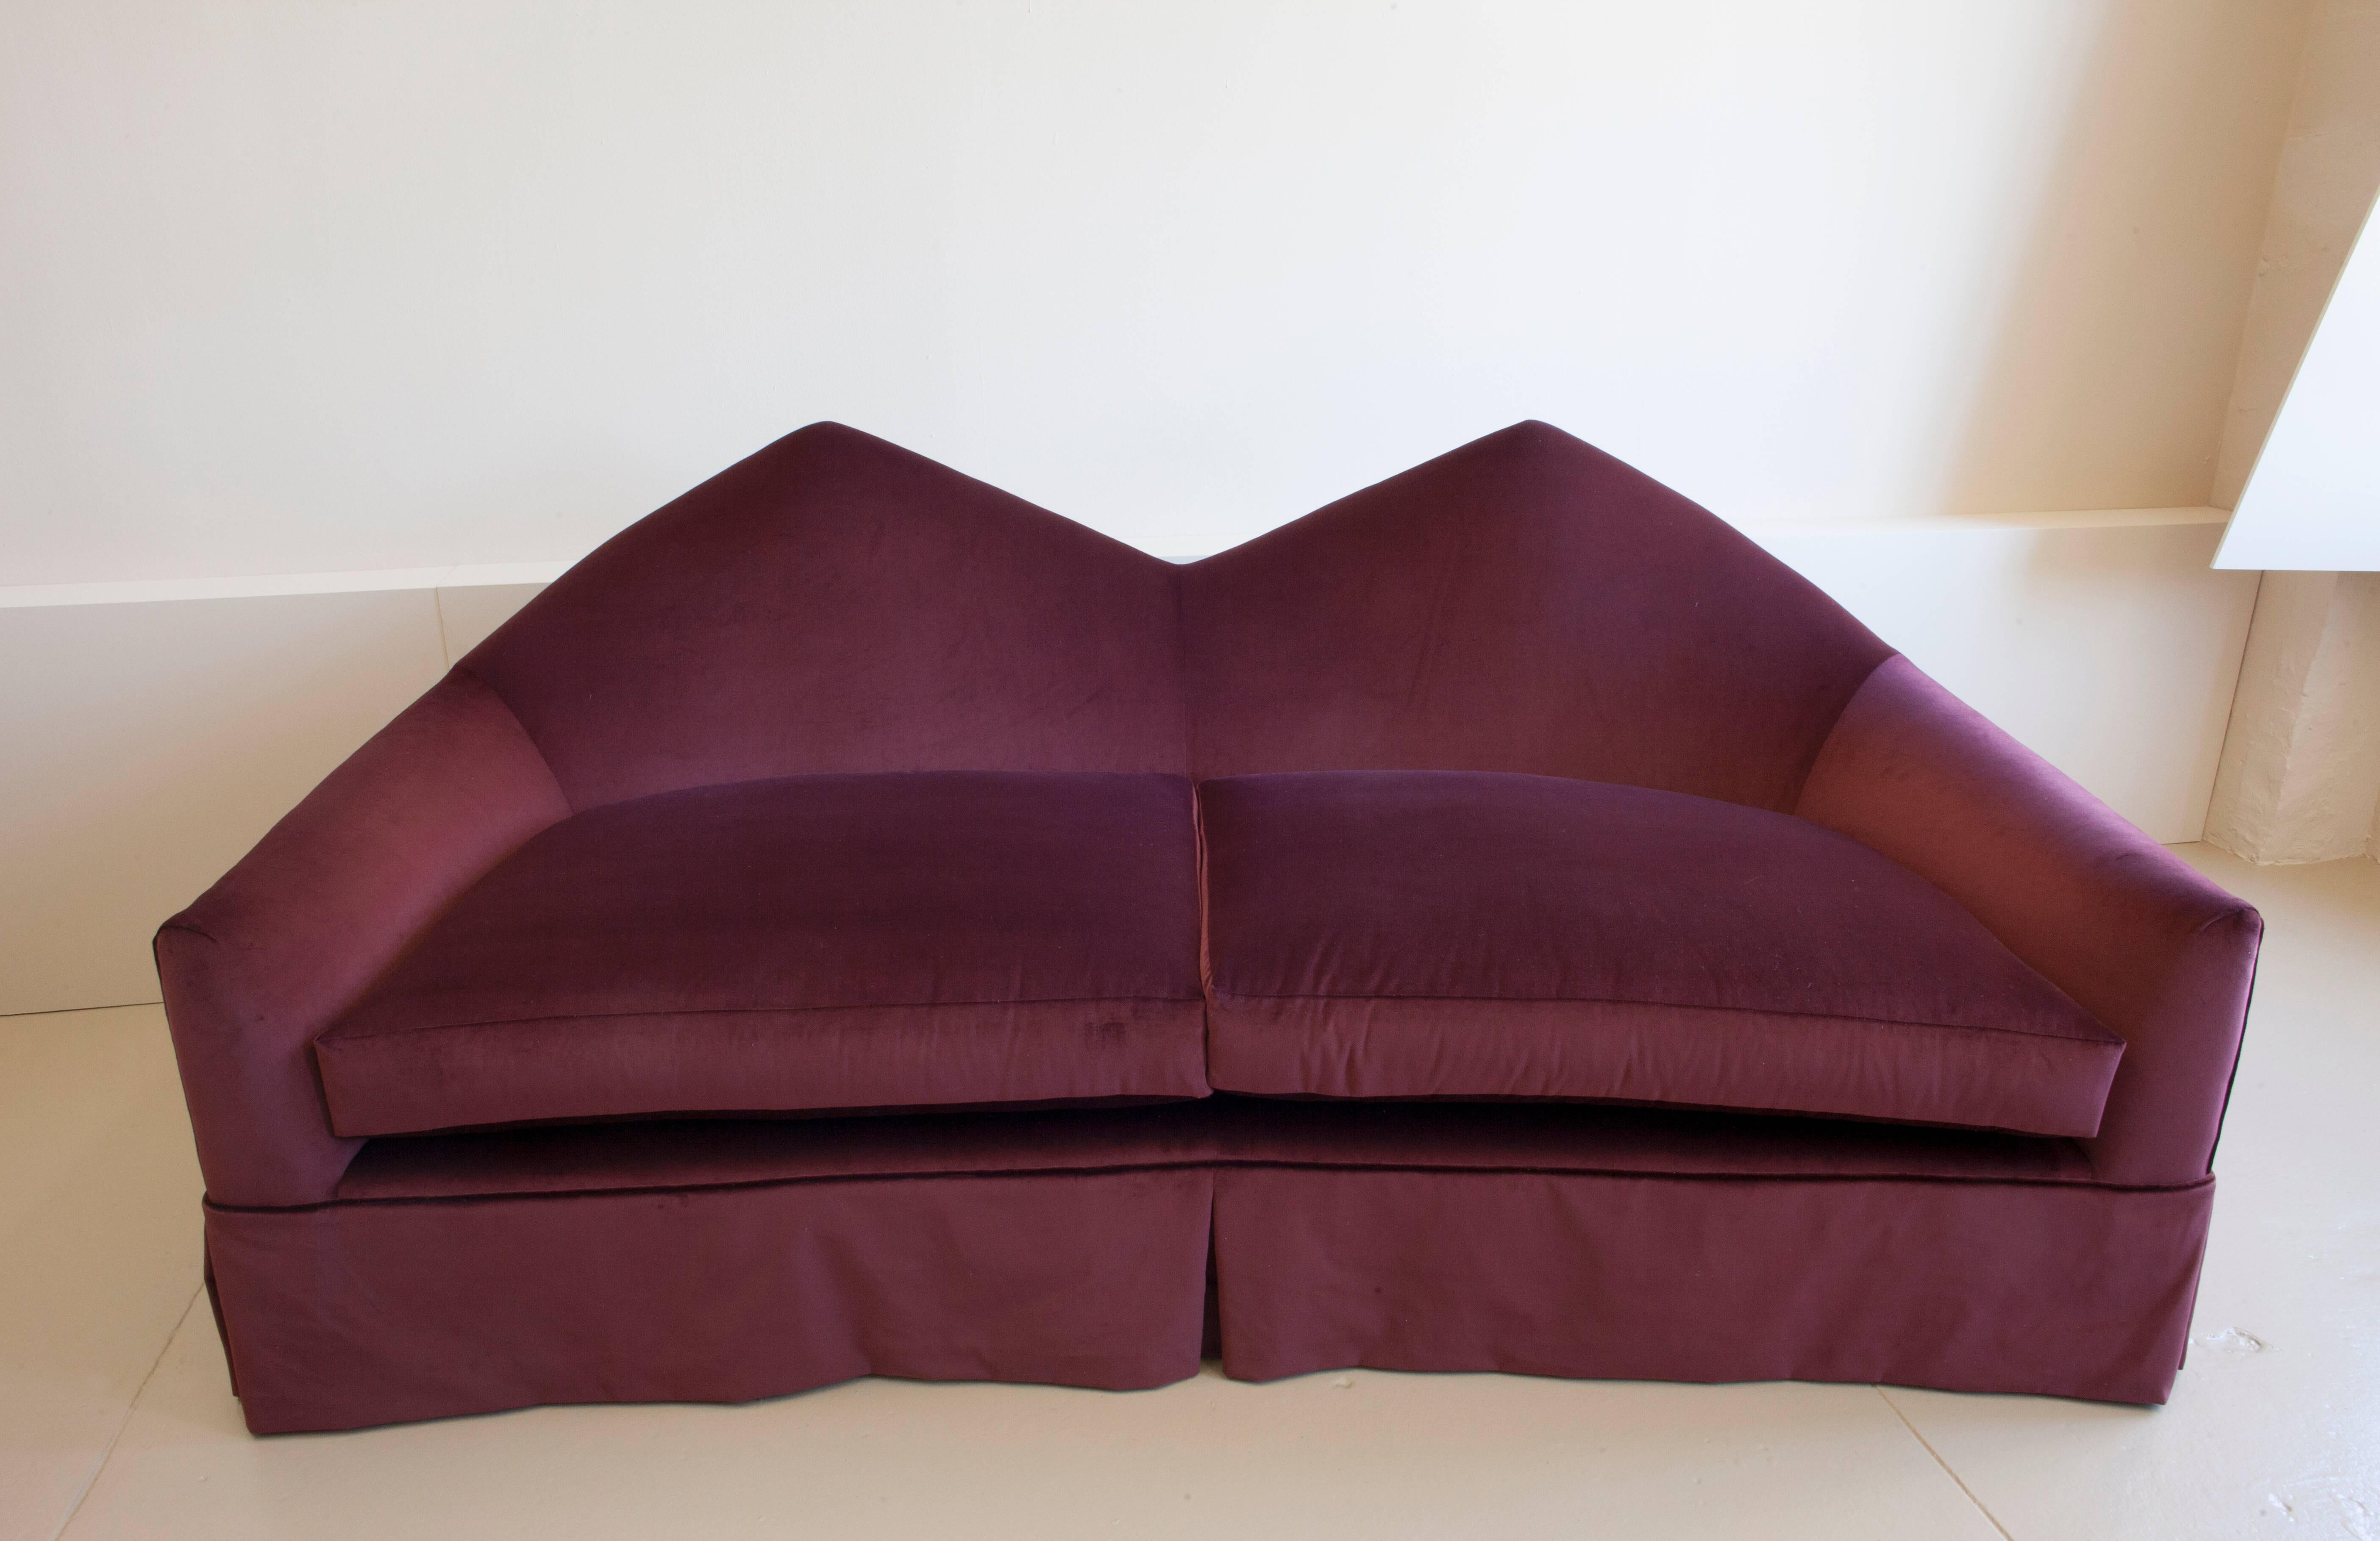 Contemporary 'Twin Peak' Sofa by Material Lust, 2016 For Sale 1